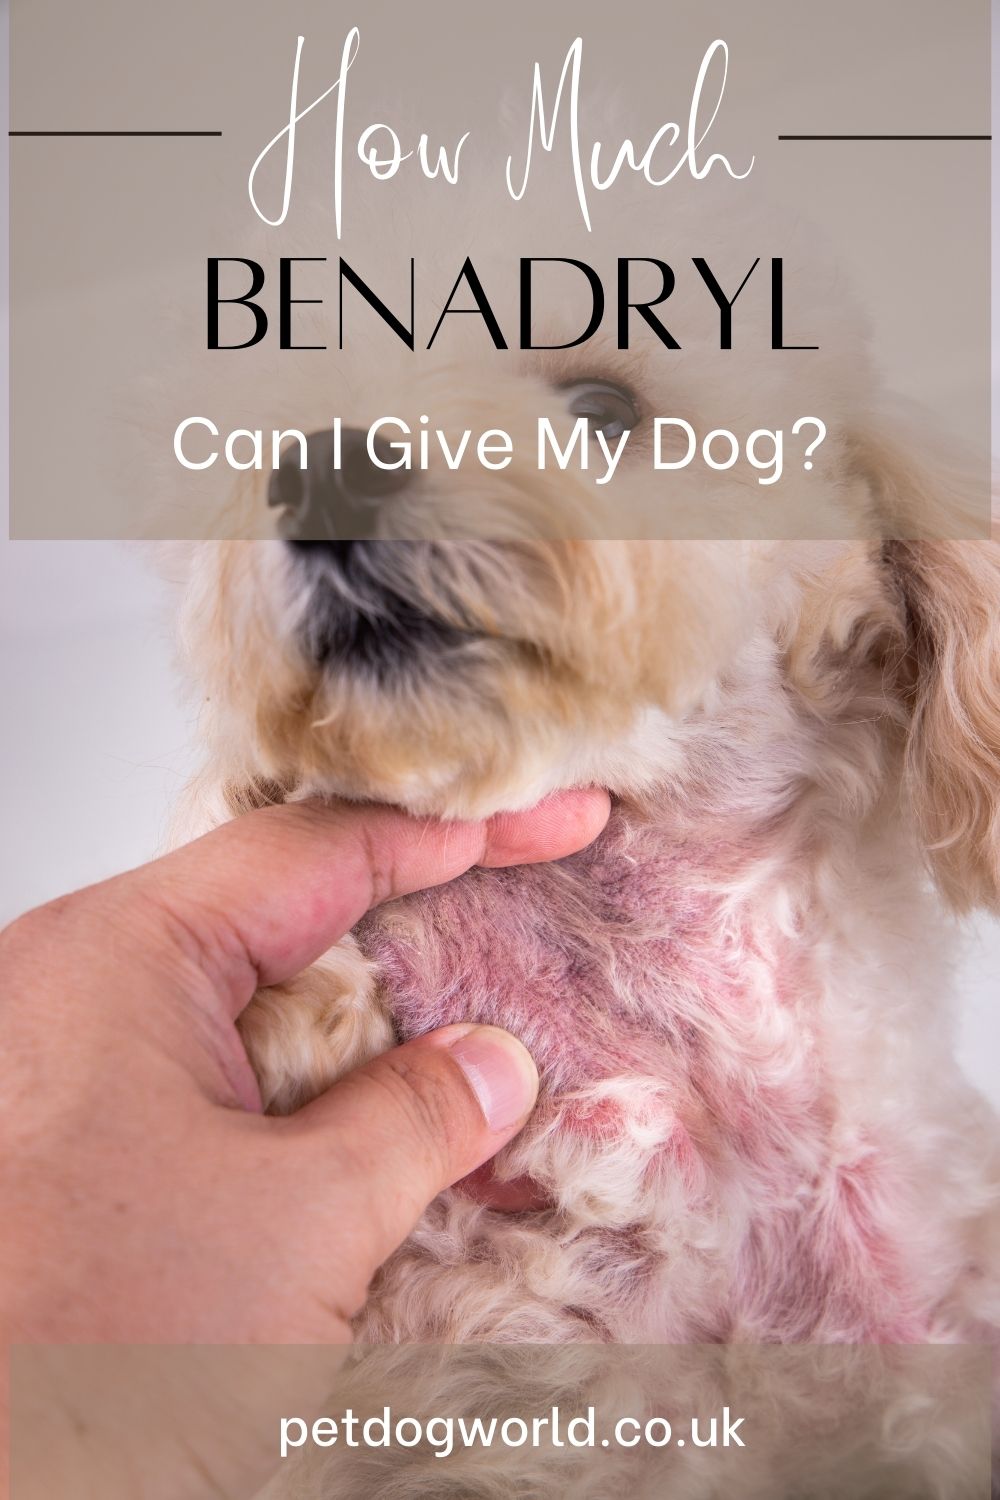 Find out how Benadryl can relieve allergy symptoms & motion sickness in dogs. Learn the correct dosage, potential risks & alternatives for your pet's safety & well-being.